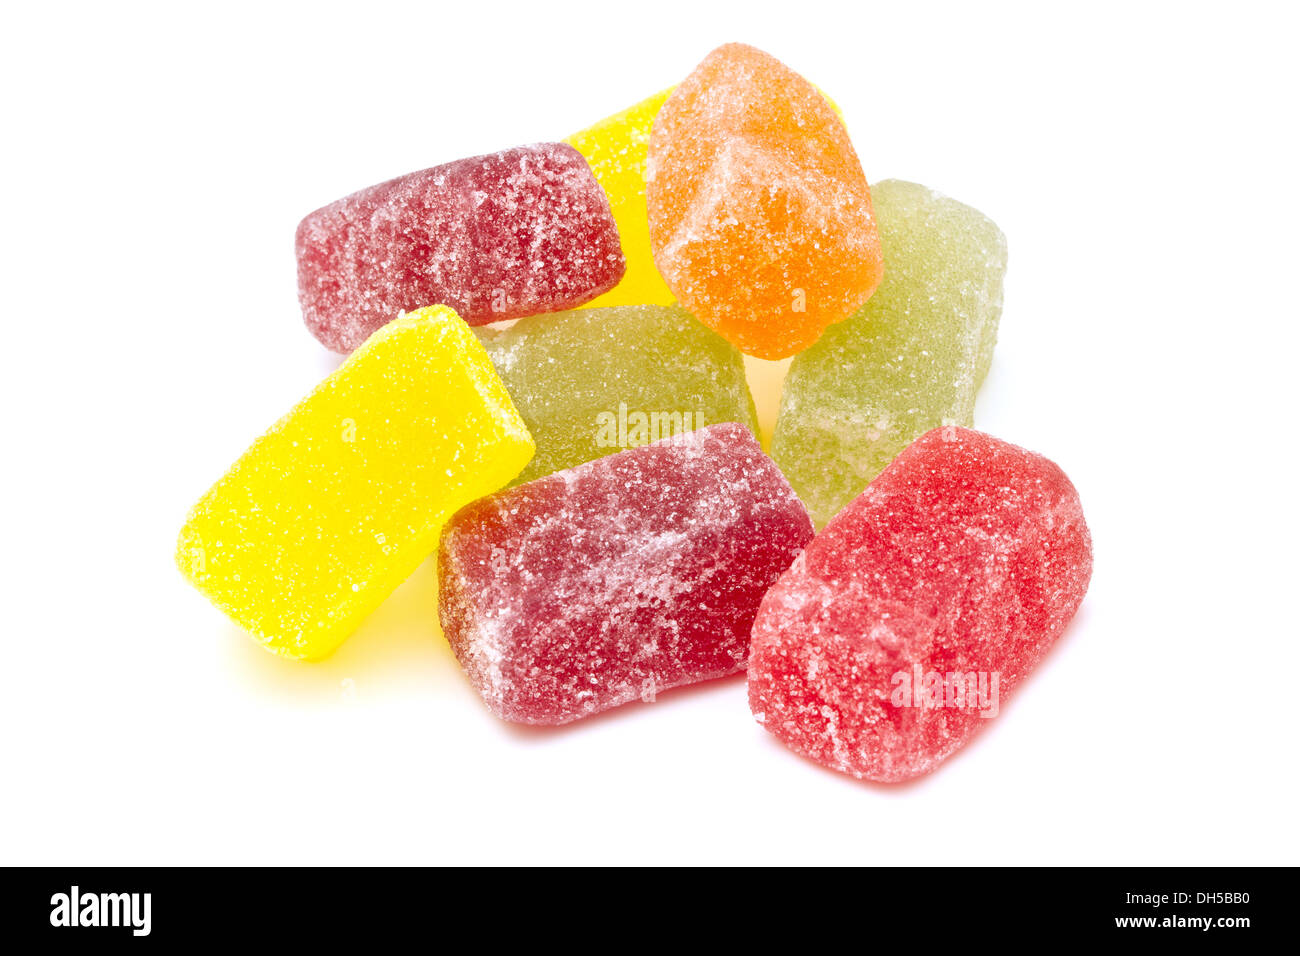 Different fruit jellies on white background Stock Photo